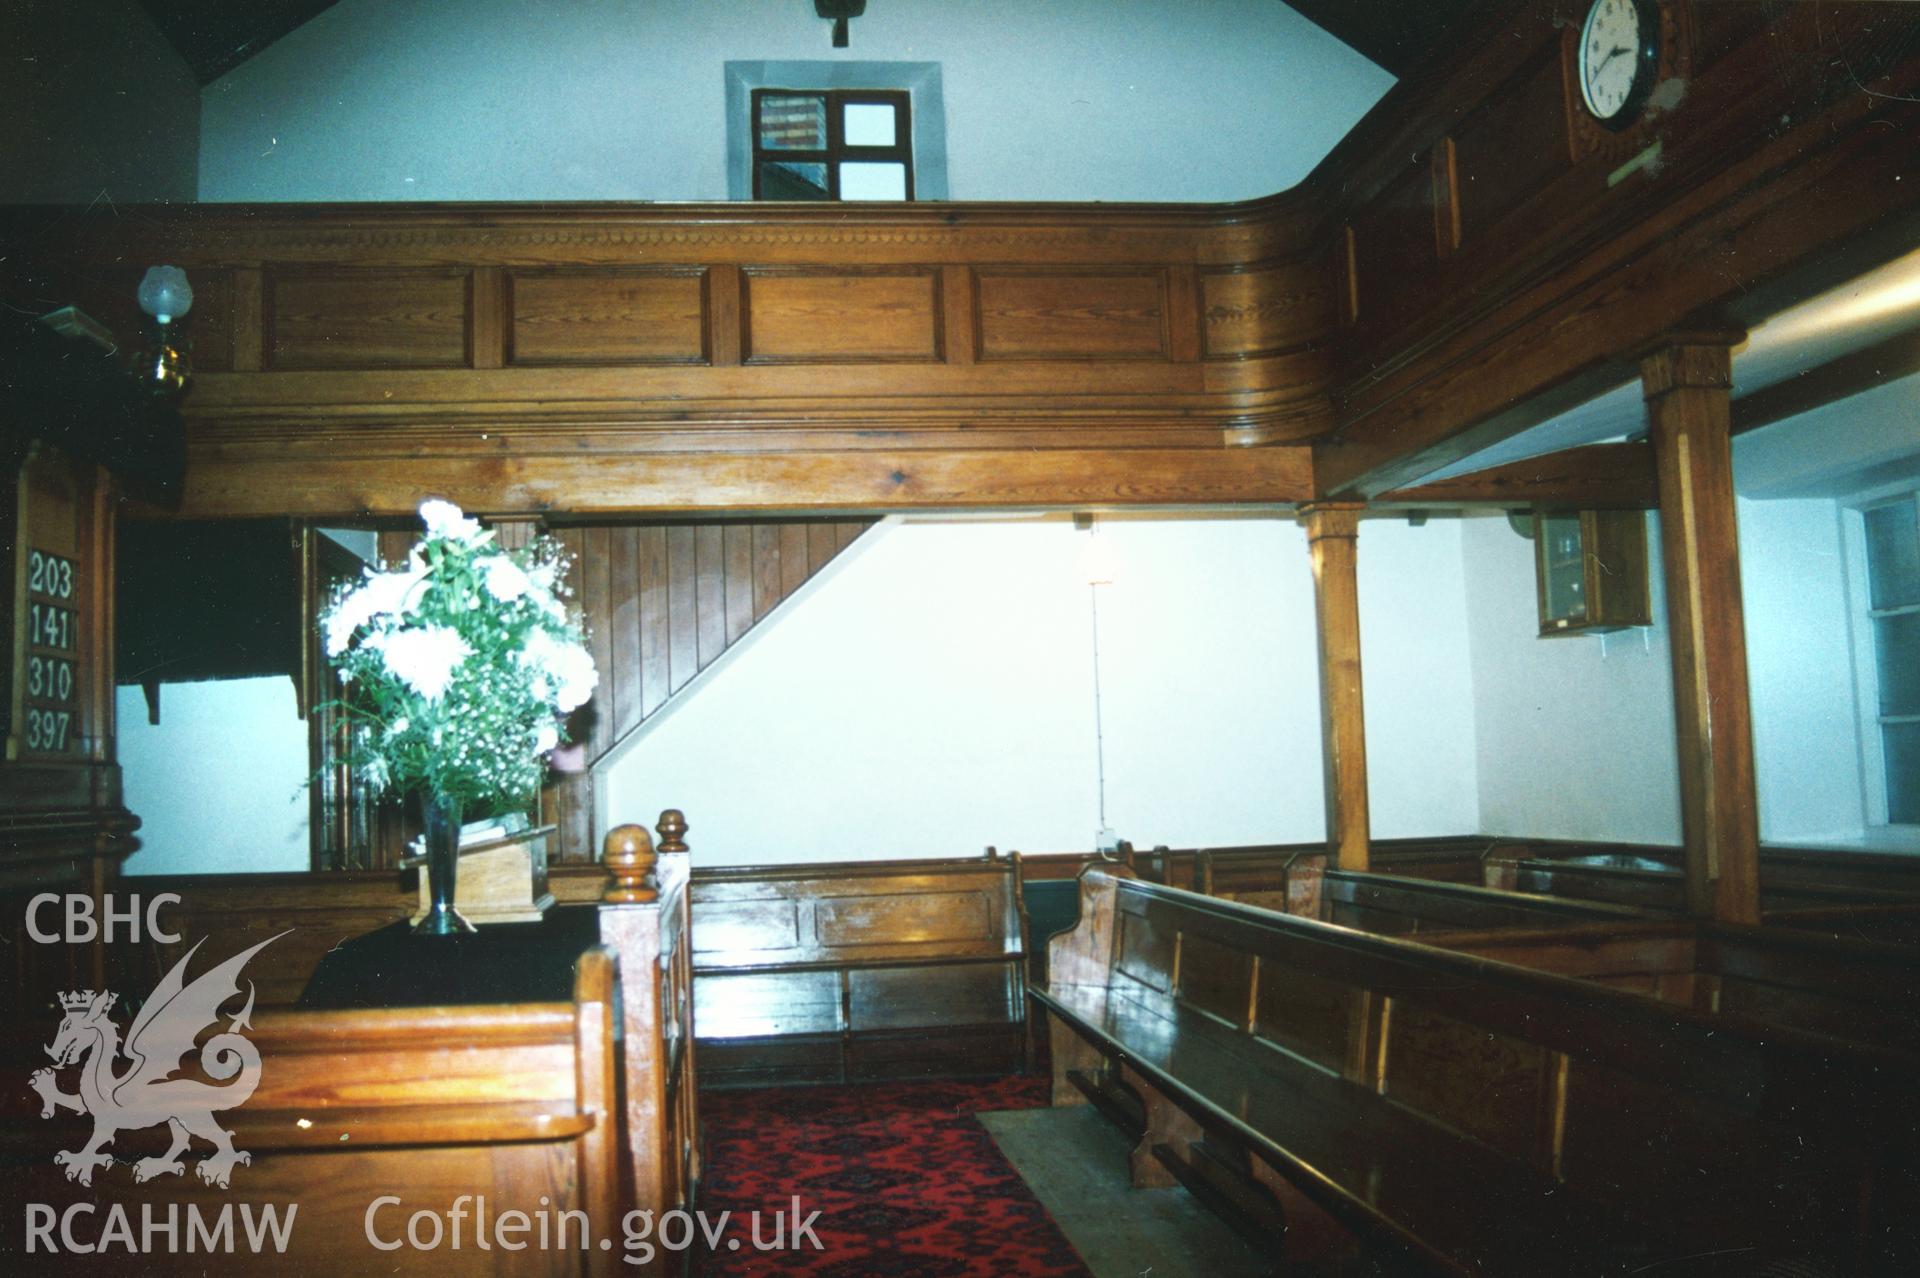 Digital copy of a colour photograph showing an interior view of Cribyn Welsh Unitarian Chapel,  taken by Robert Scourfield, c.1996.